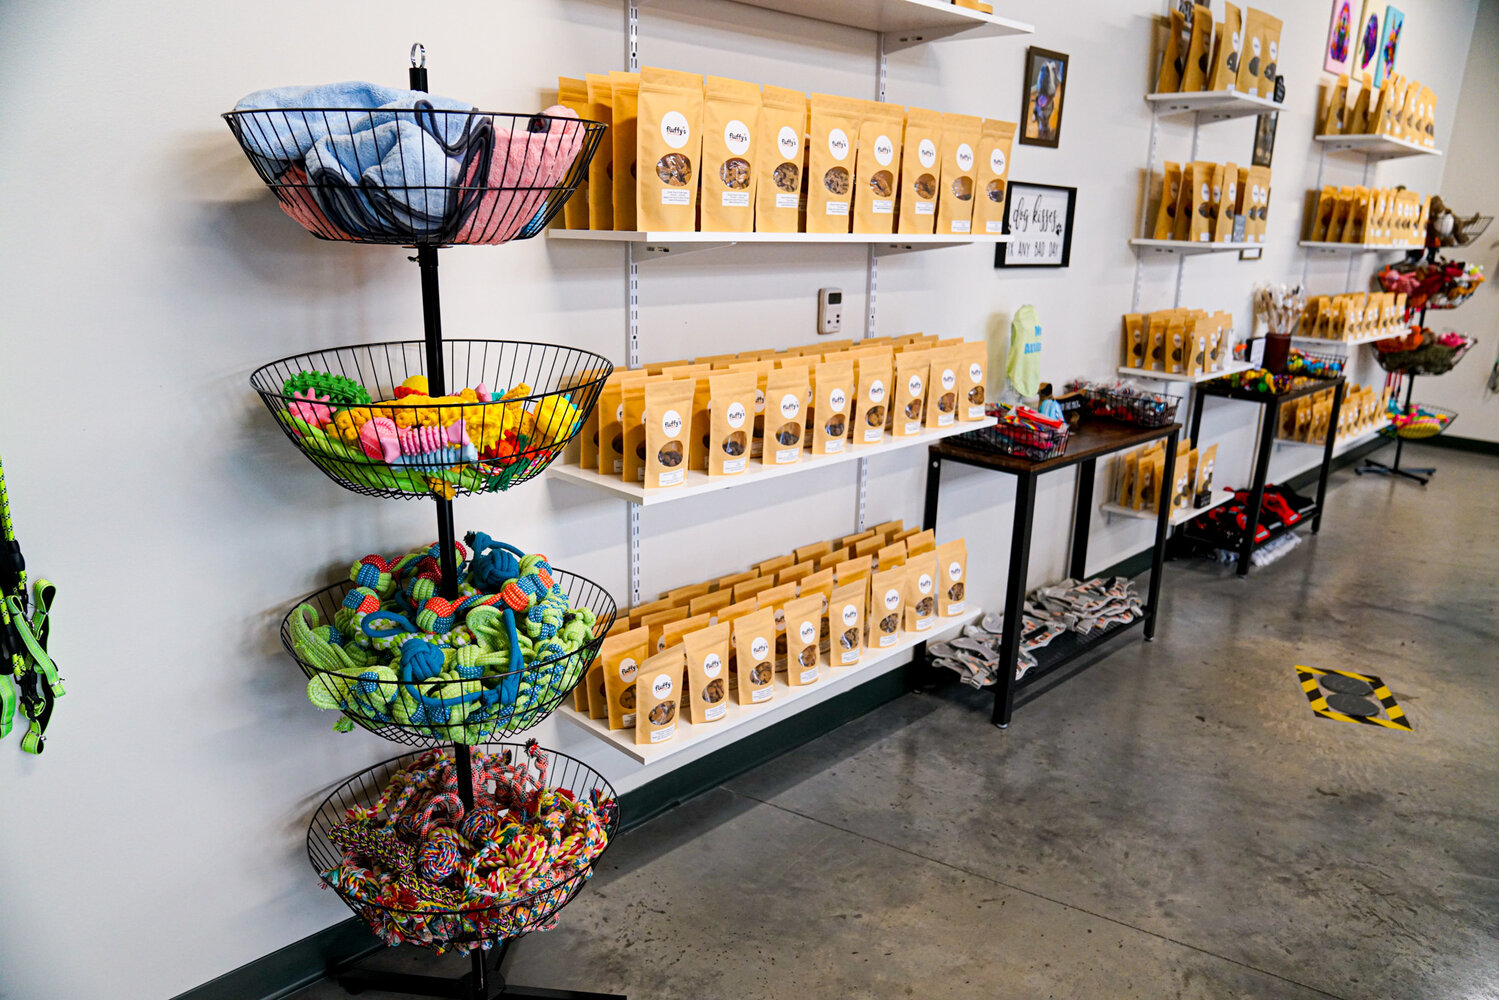 The store offers a wide variety of treats, leashes, pet beds, grooming tools and stylish accessories for fashionista pets.